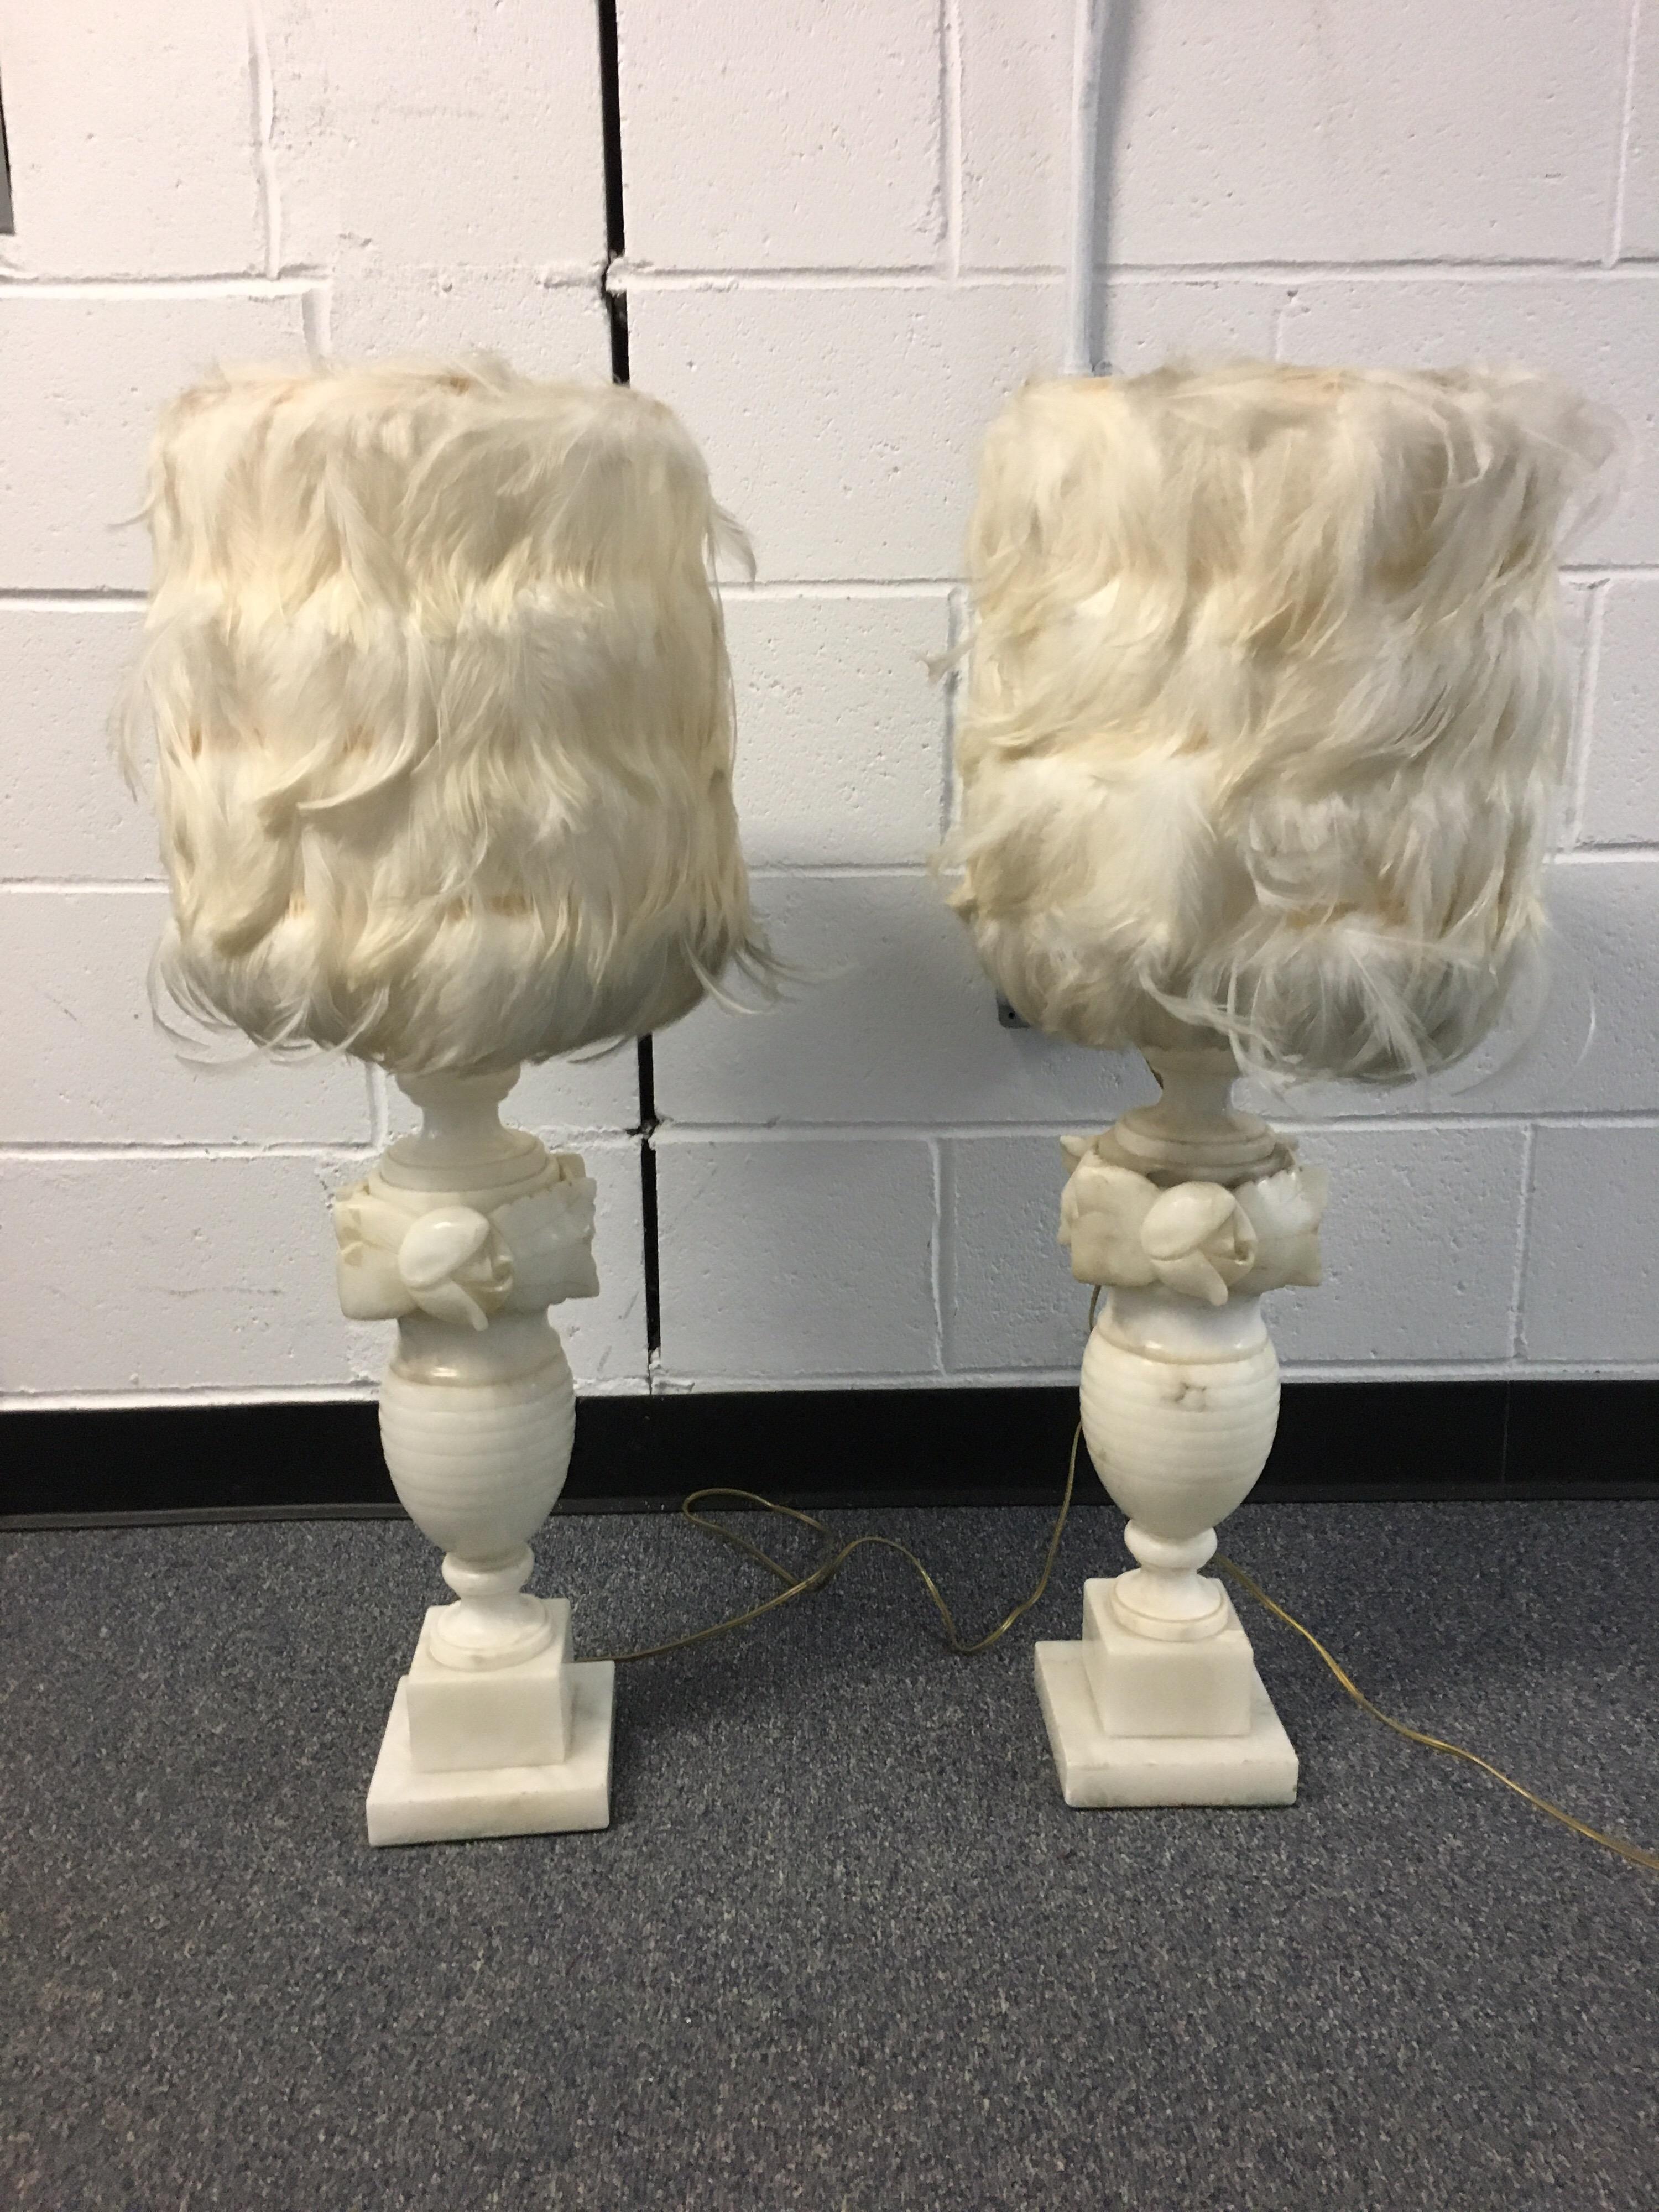 Pair of white Alabaster carved lamps with custom feather shades. Carved flower and urn shaped lamps. Cream feather lamp shades. Both working well.

Overall height with shade: 10.25